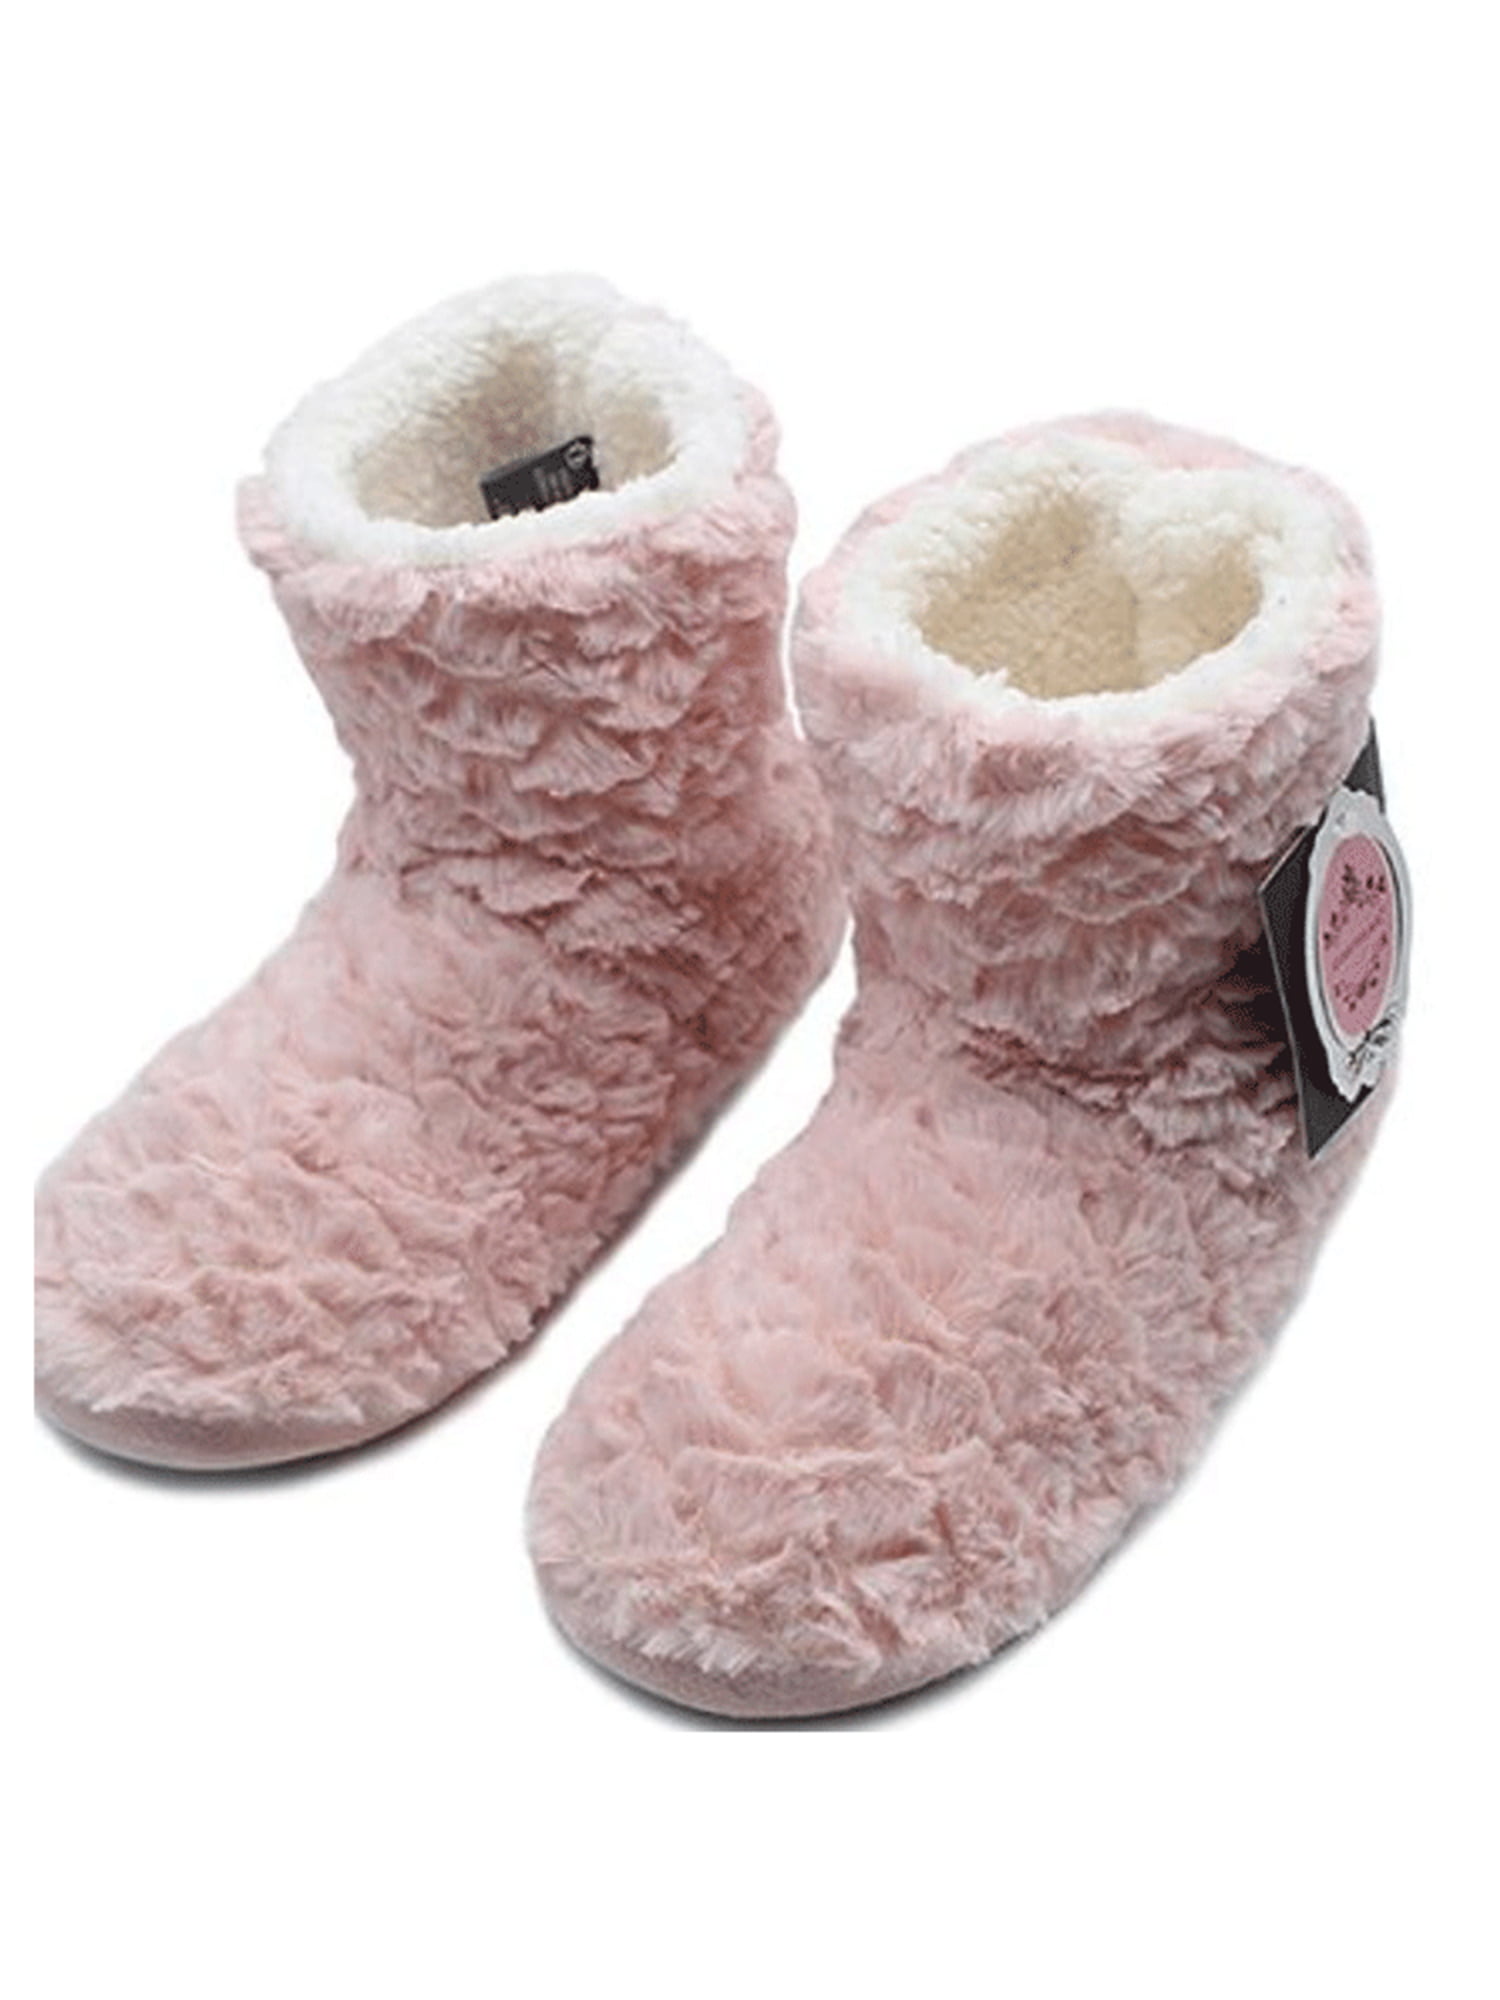 LADIES WOMENS SLIPPERS BOOTS  GIRLS WINTER WARM FUR NEW ANKLE BOOTIE SHOES SIZE 